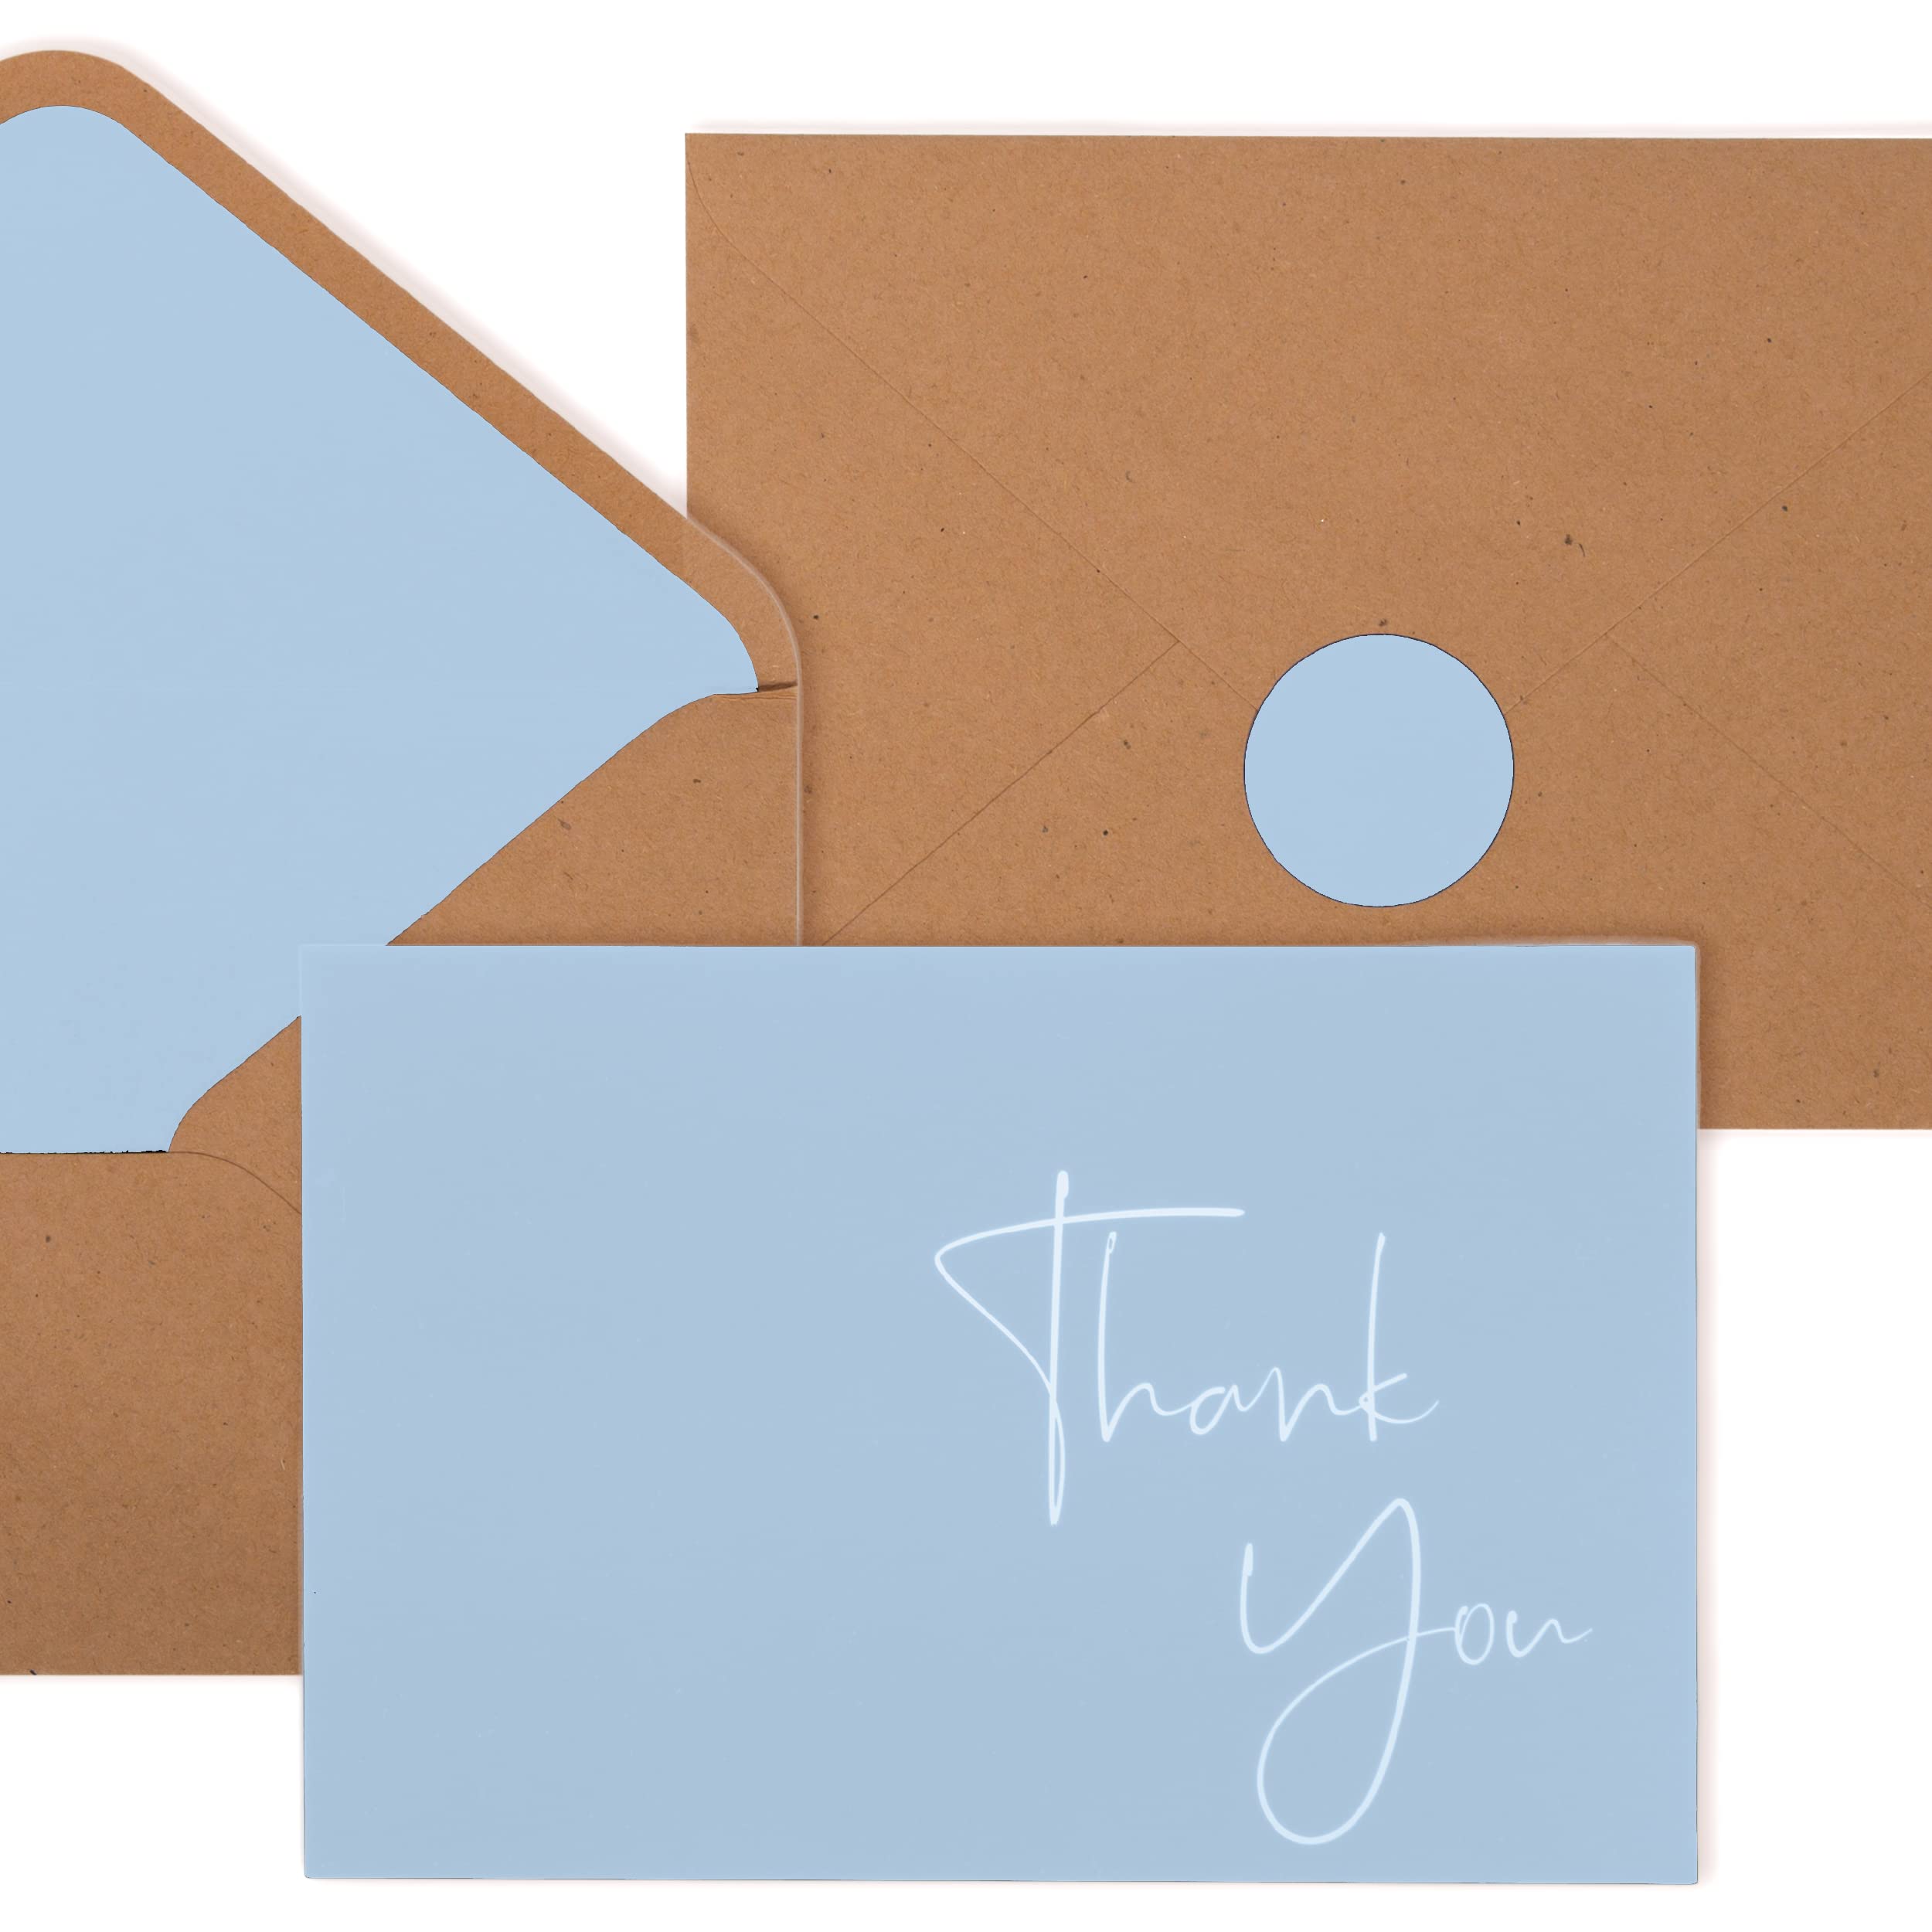 VNS Creations 100 pack Thank You Cards with Envelopes & Stickers - Classy 4x6 Blank Thank You Cards Bulk Box Set - Large Thank You Notes for Wedding, Small Business, Baby & Bridal Shower (Light Blue)